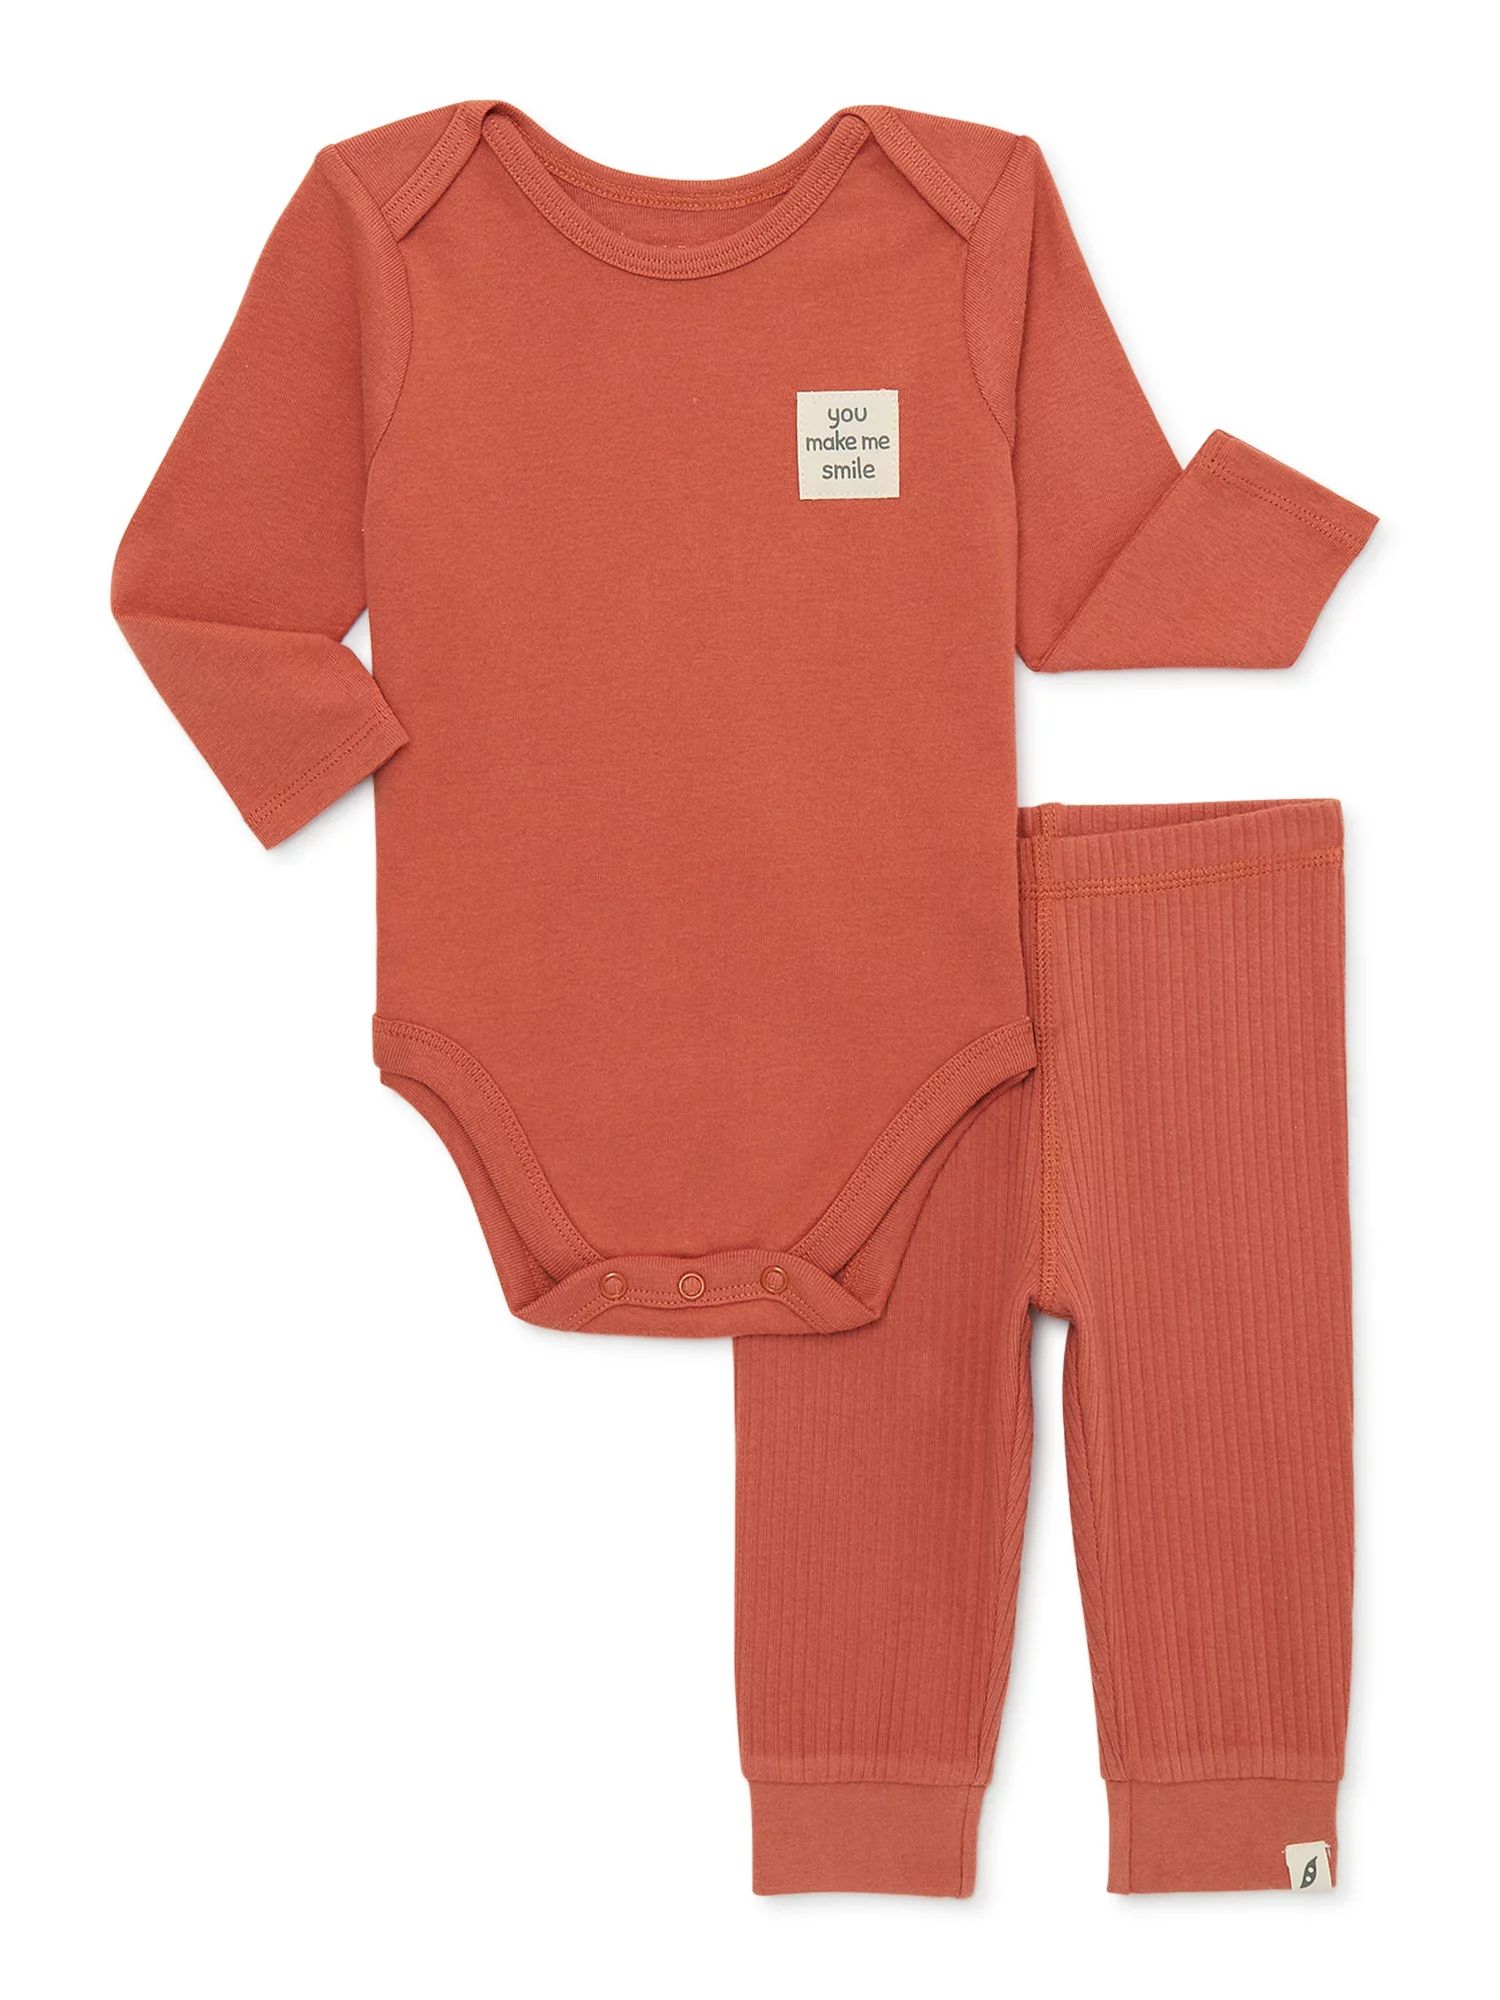 easy-peasy Baby Bodysuit and Jogger Pants Outfit Set, 2-Piece, Sizes 0/3-24 Months | Walmart (US)